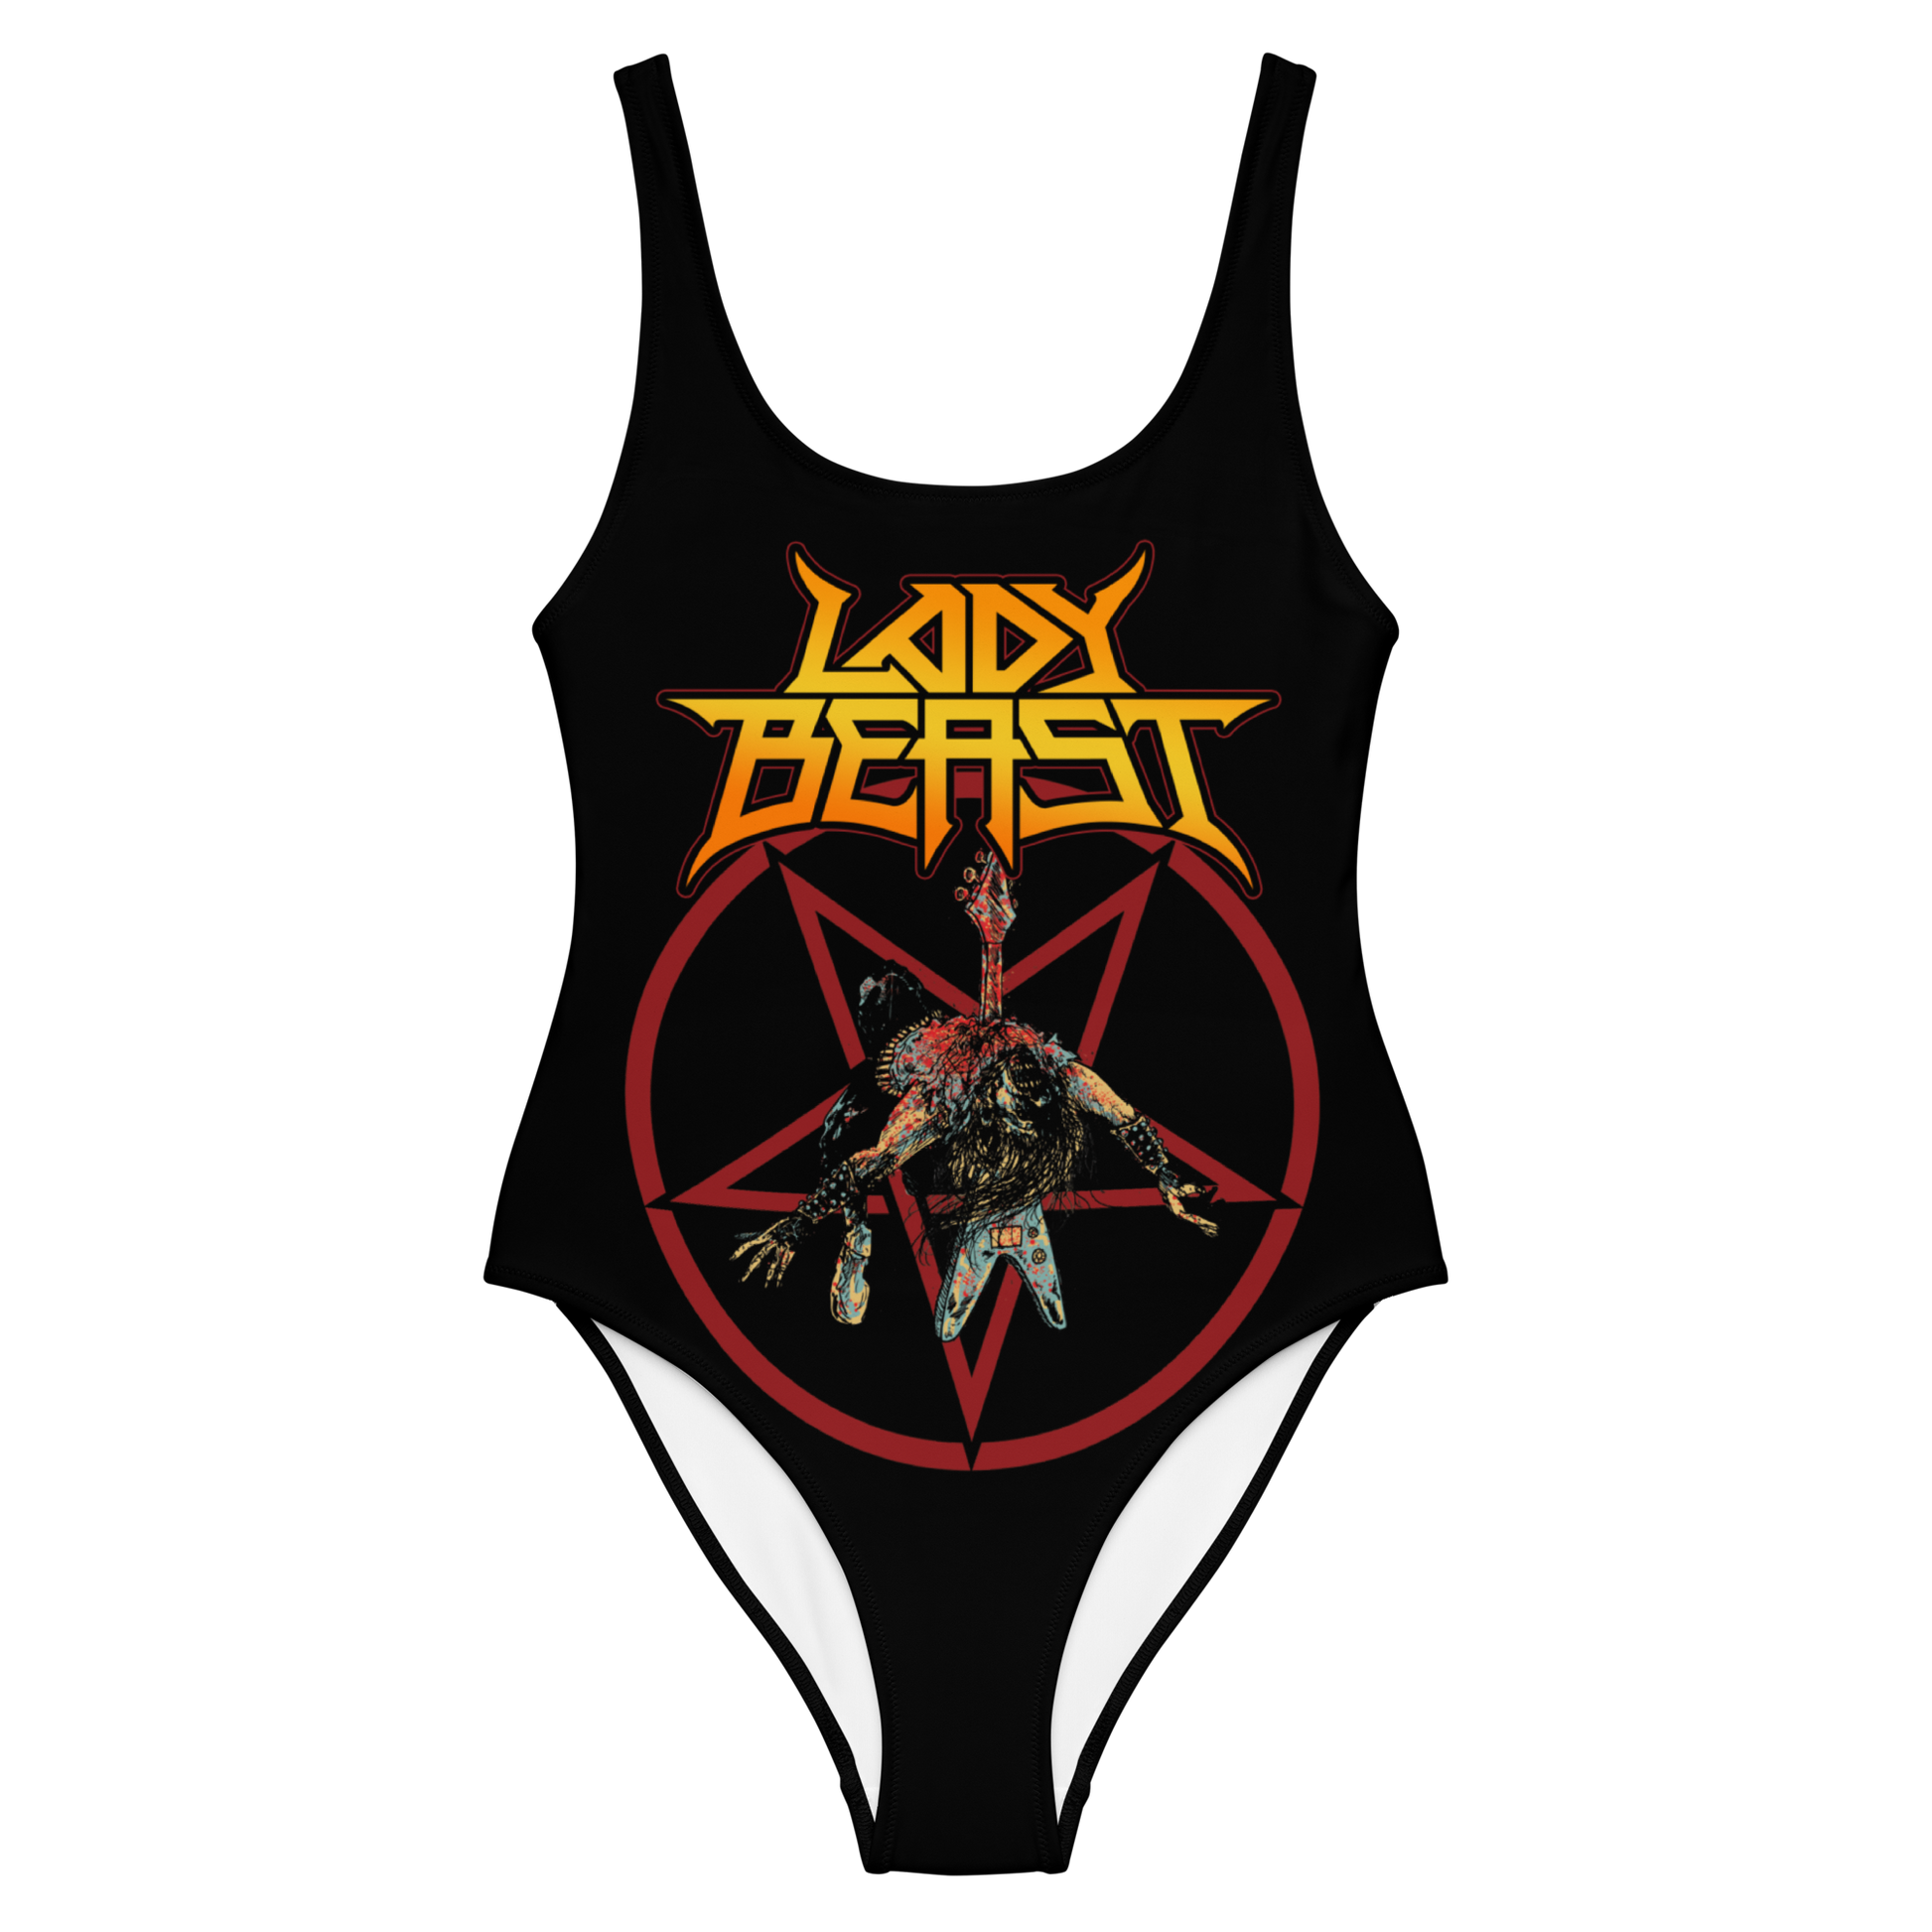 Lady Beast official licensed swimming bodysuit by Metal Mistress